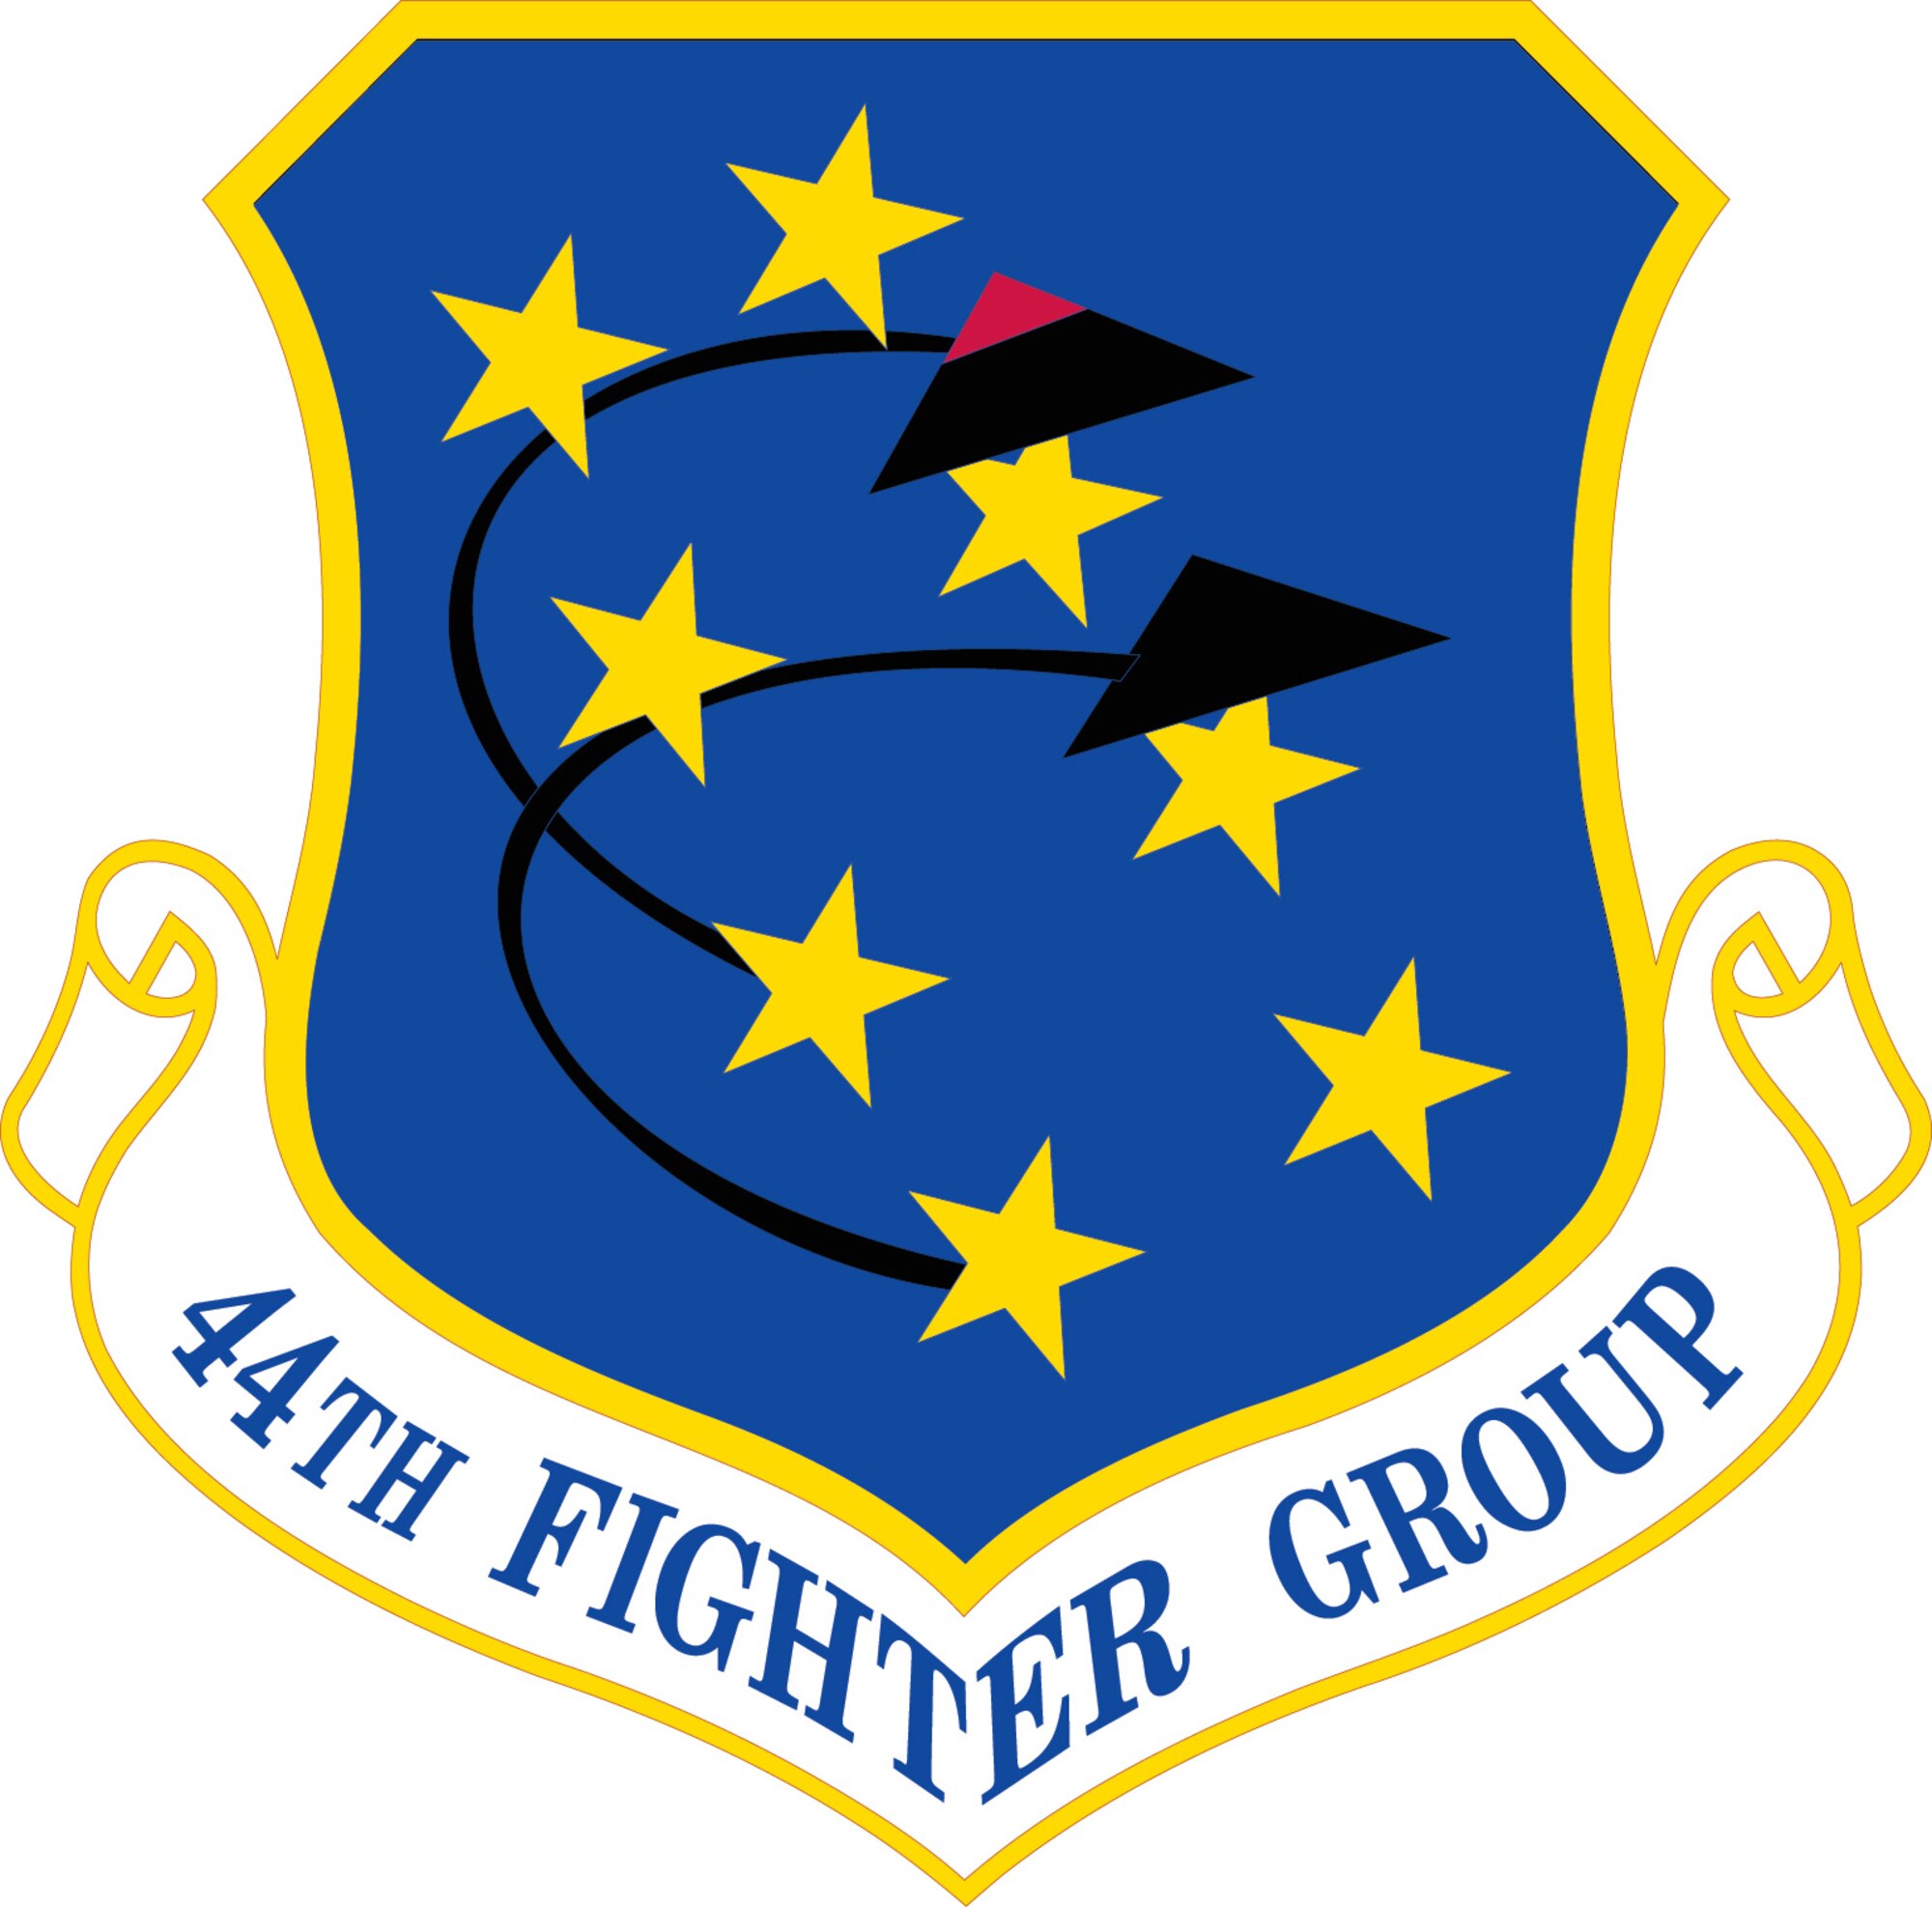 44th Fighter Group shield